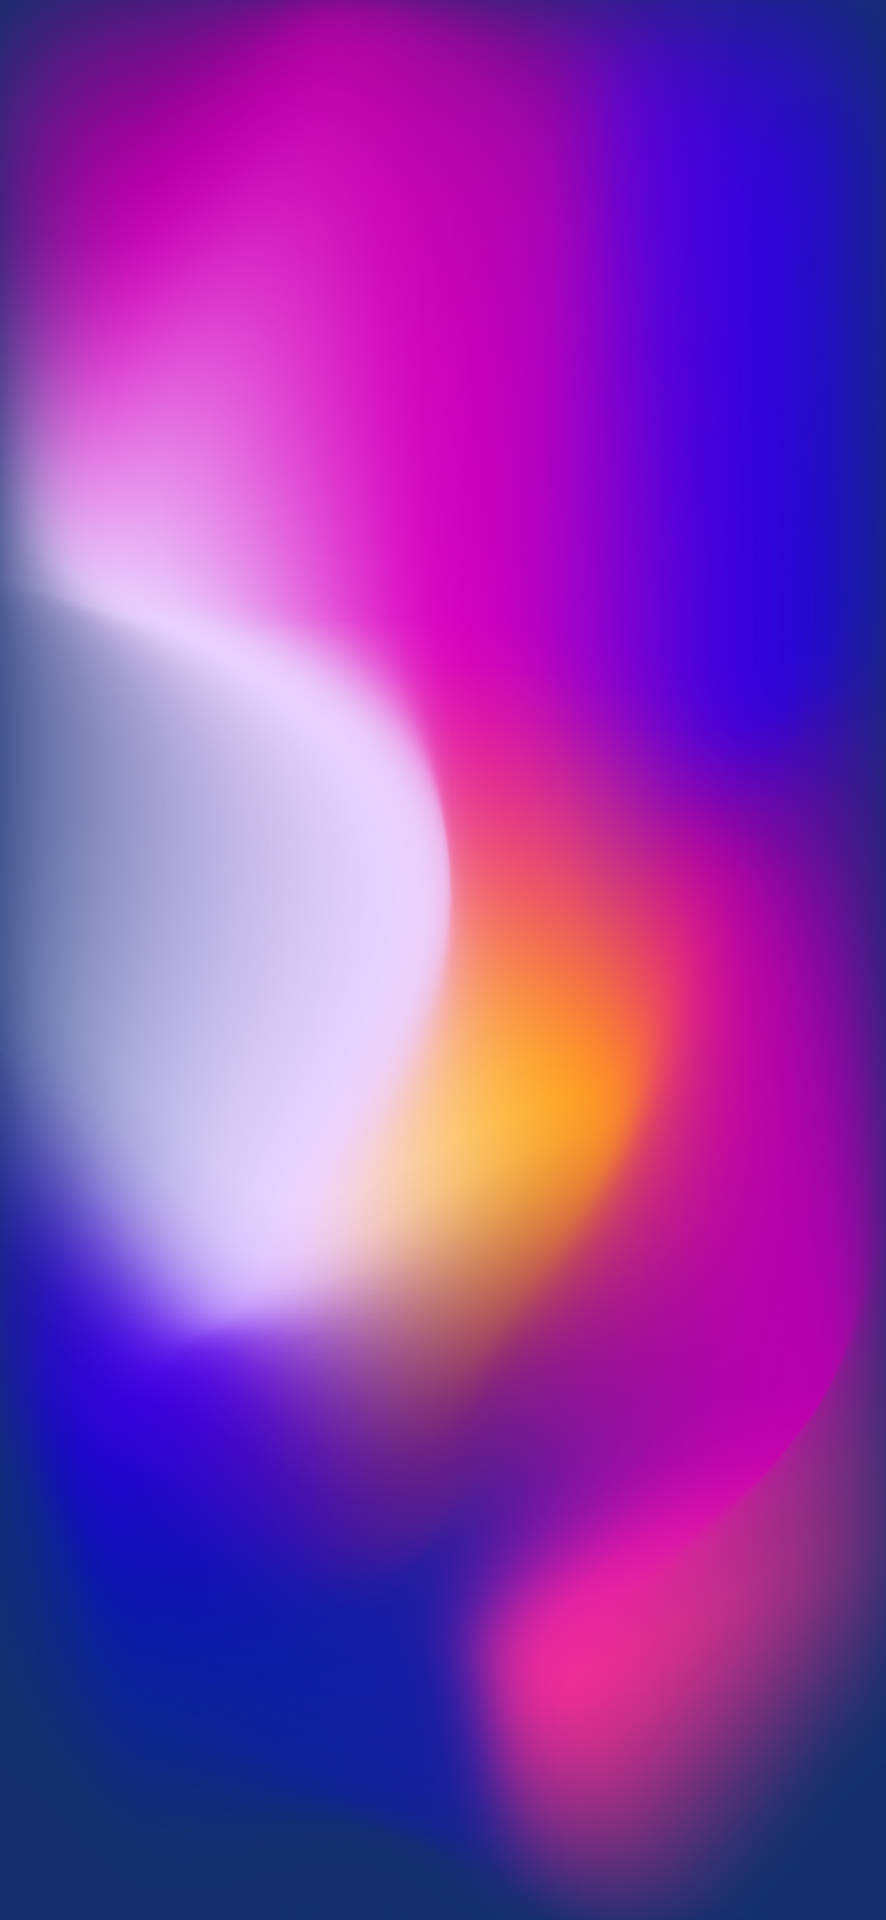 Bright Abstract Pink And Blue Wallpaper